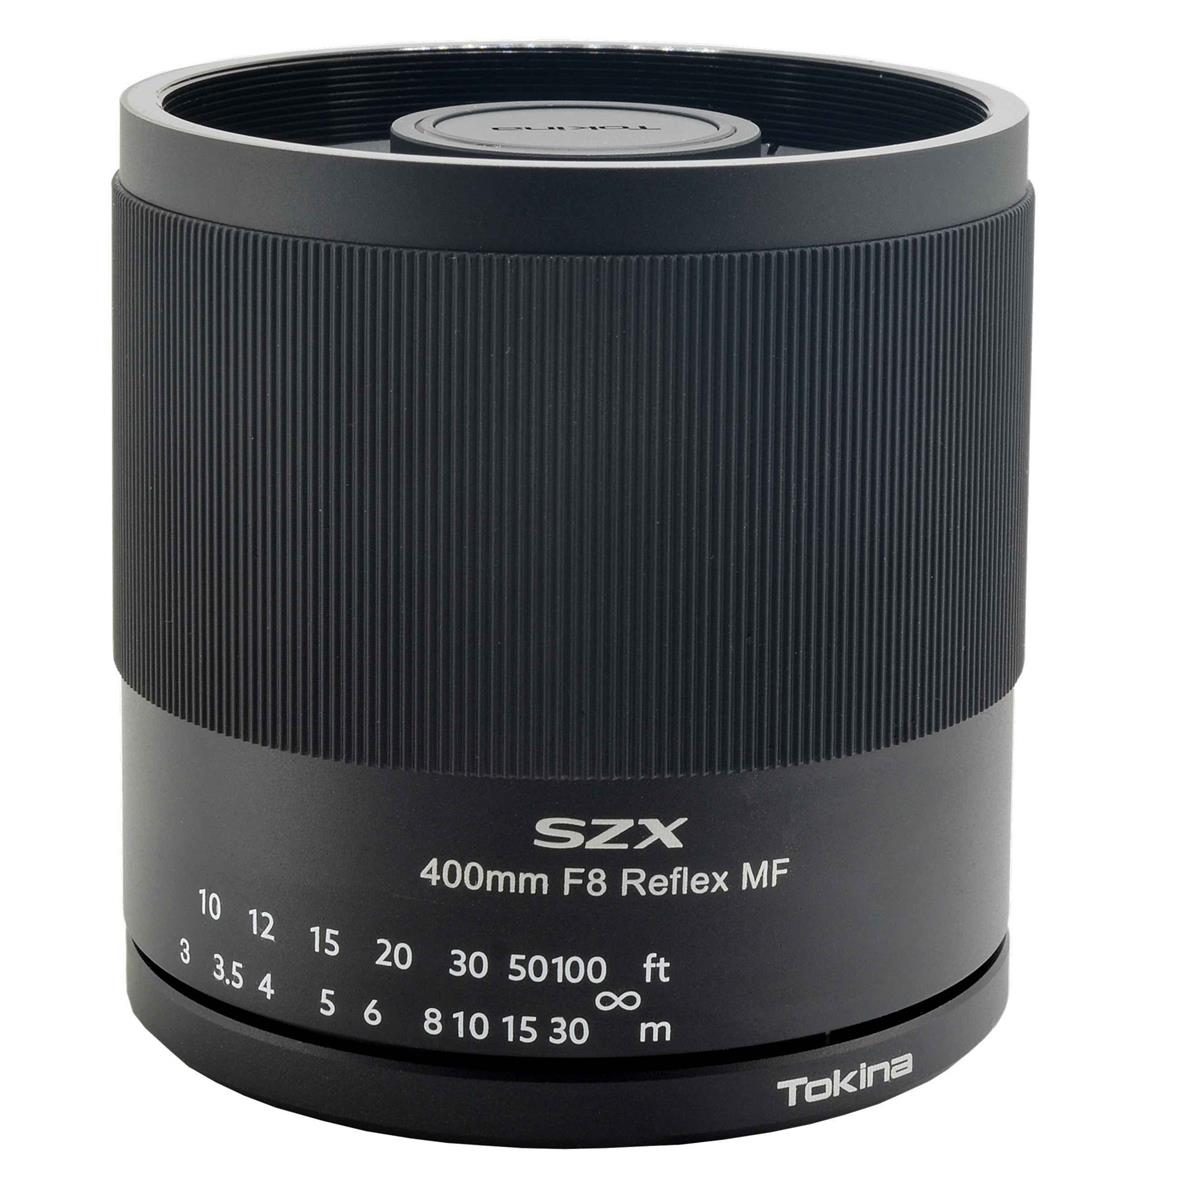 Image of Tokina SZX 400mm f/8 Reflex MF Lens for Canon EF-M